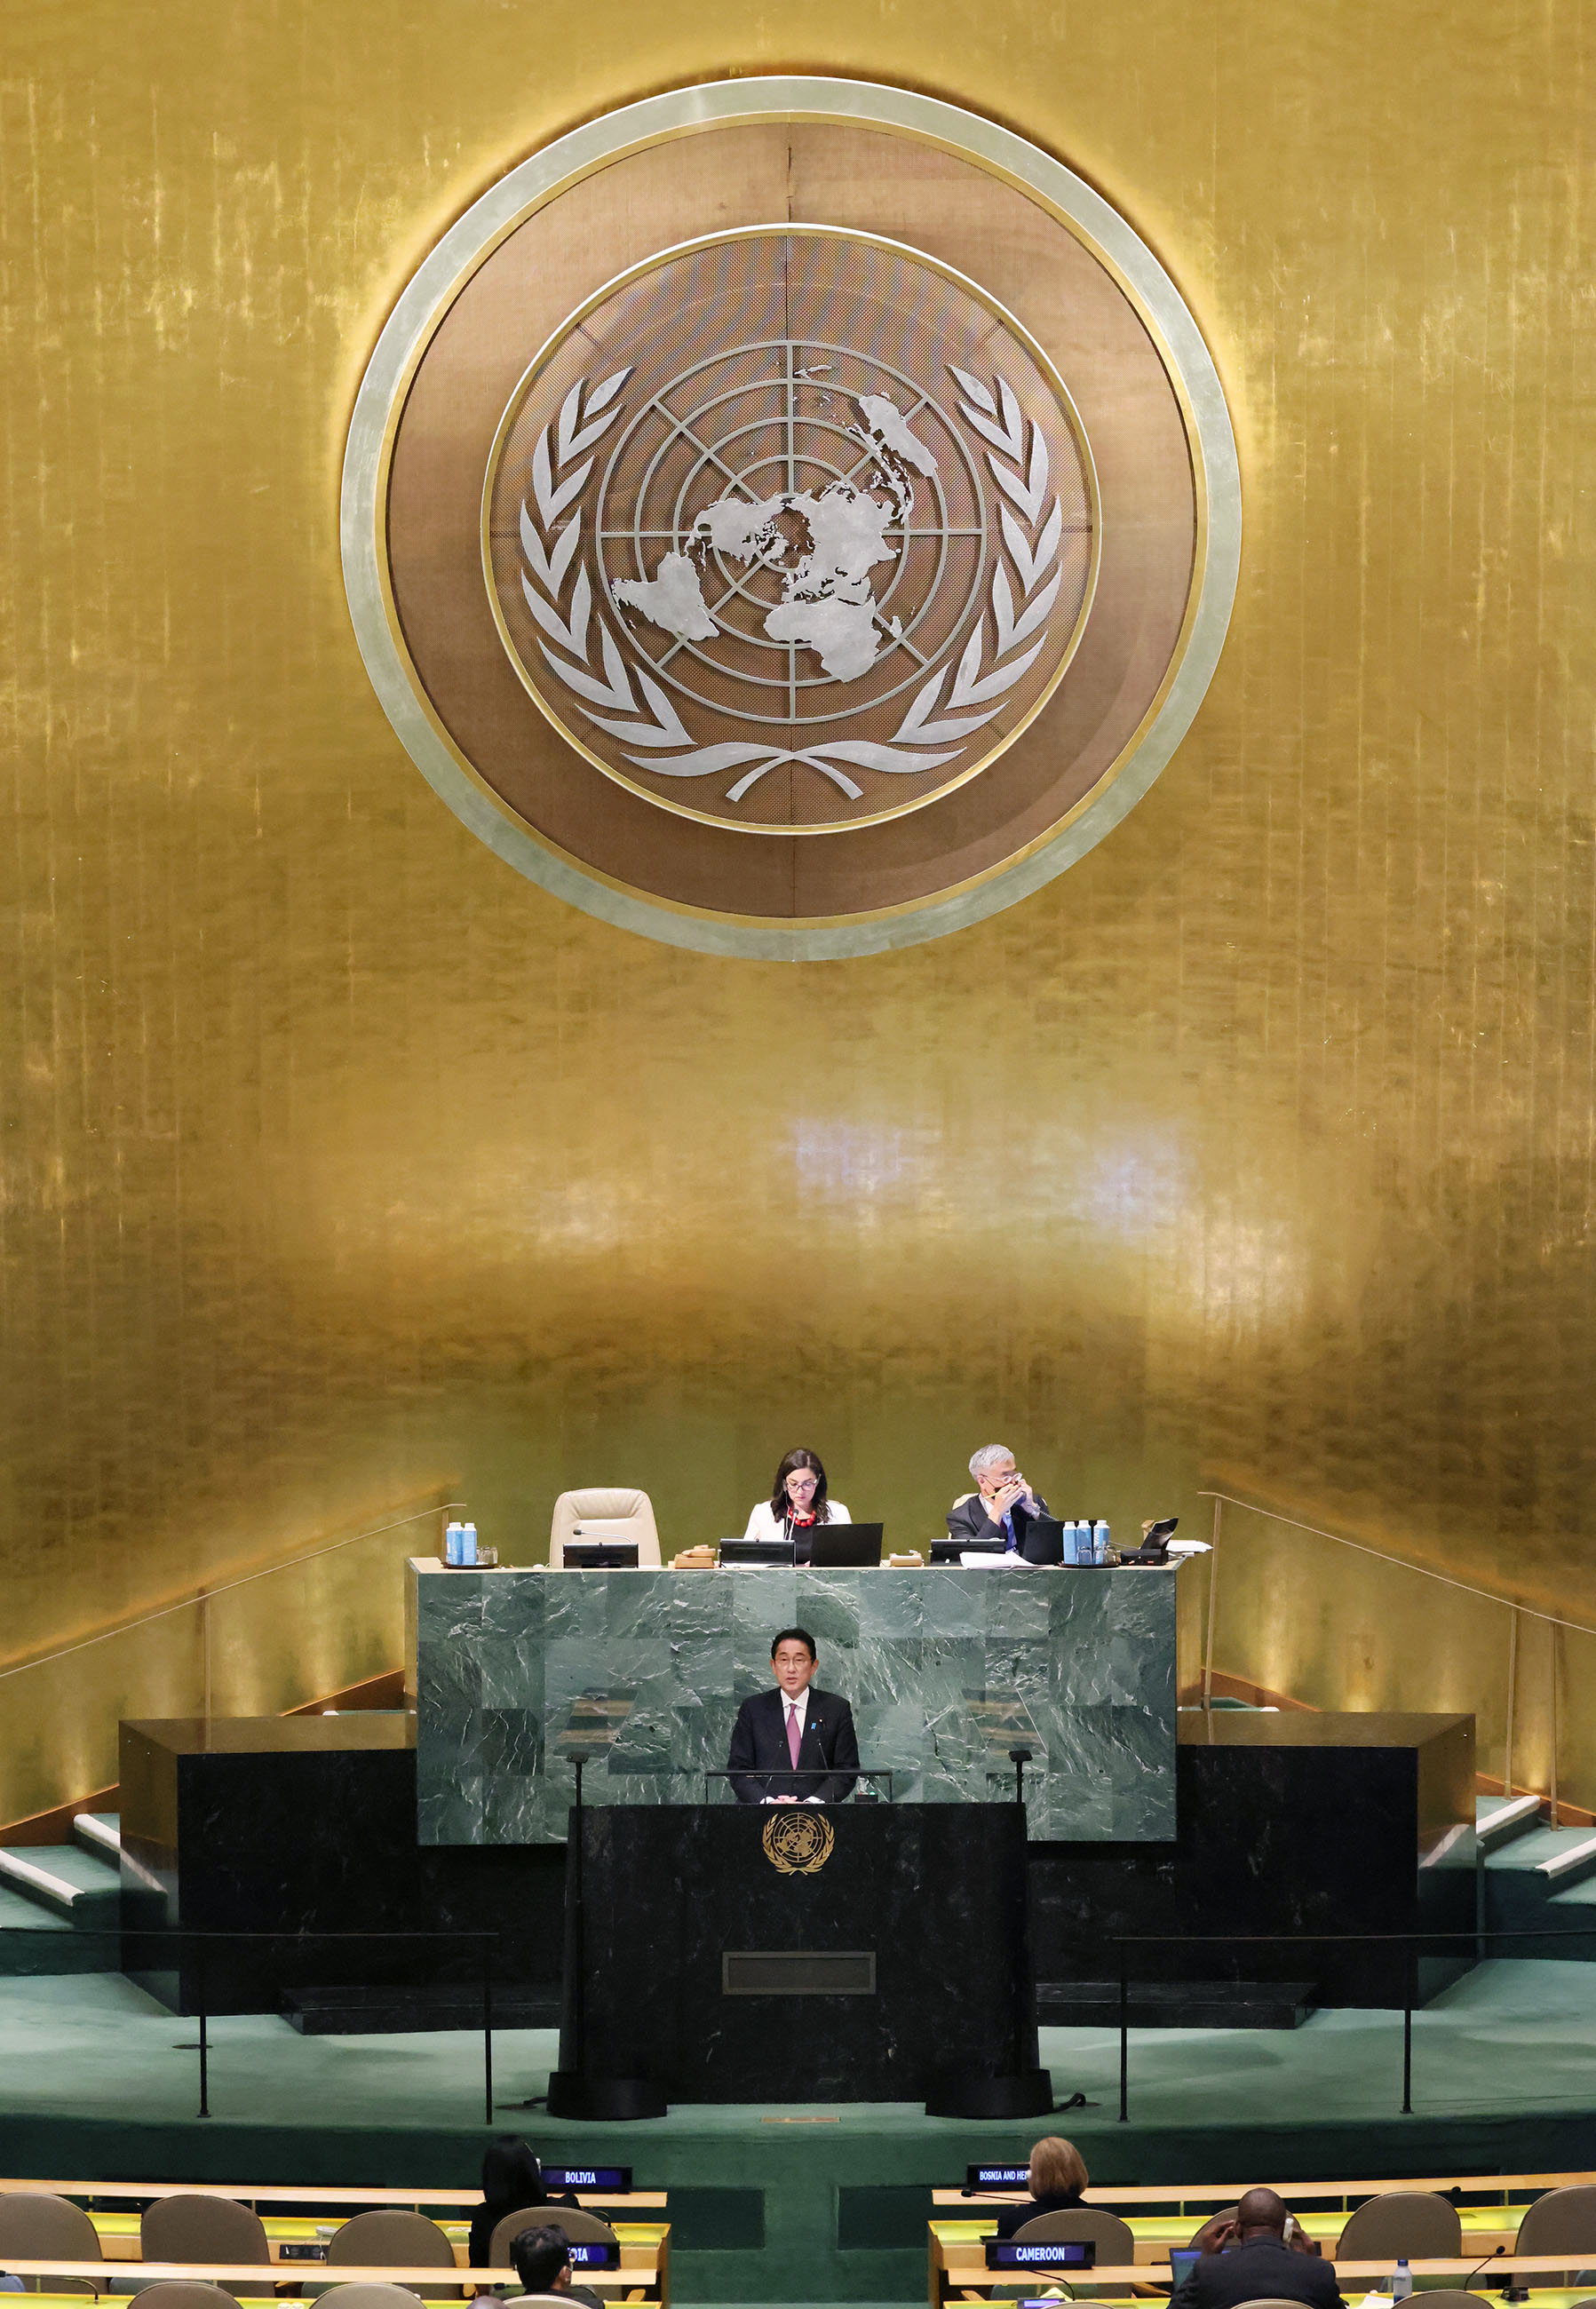 Photograph of the Prime Minister delivering an address at the United Nations General Assembly (12)